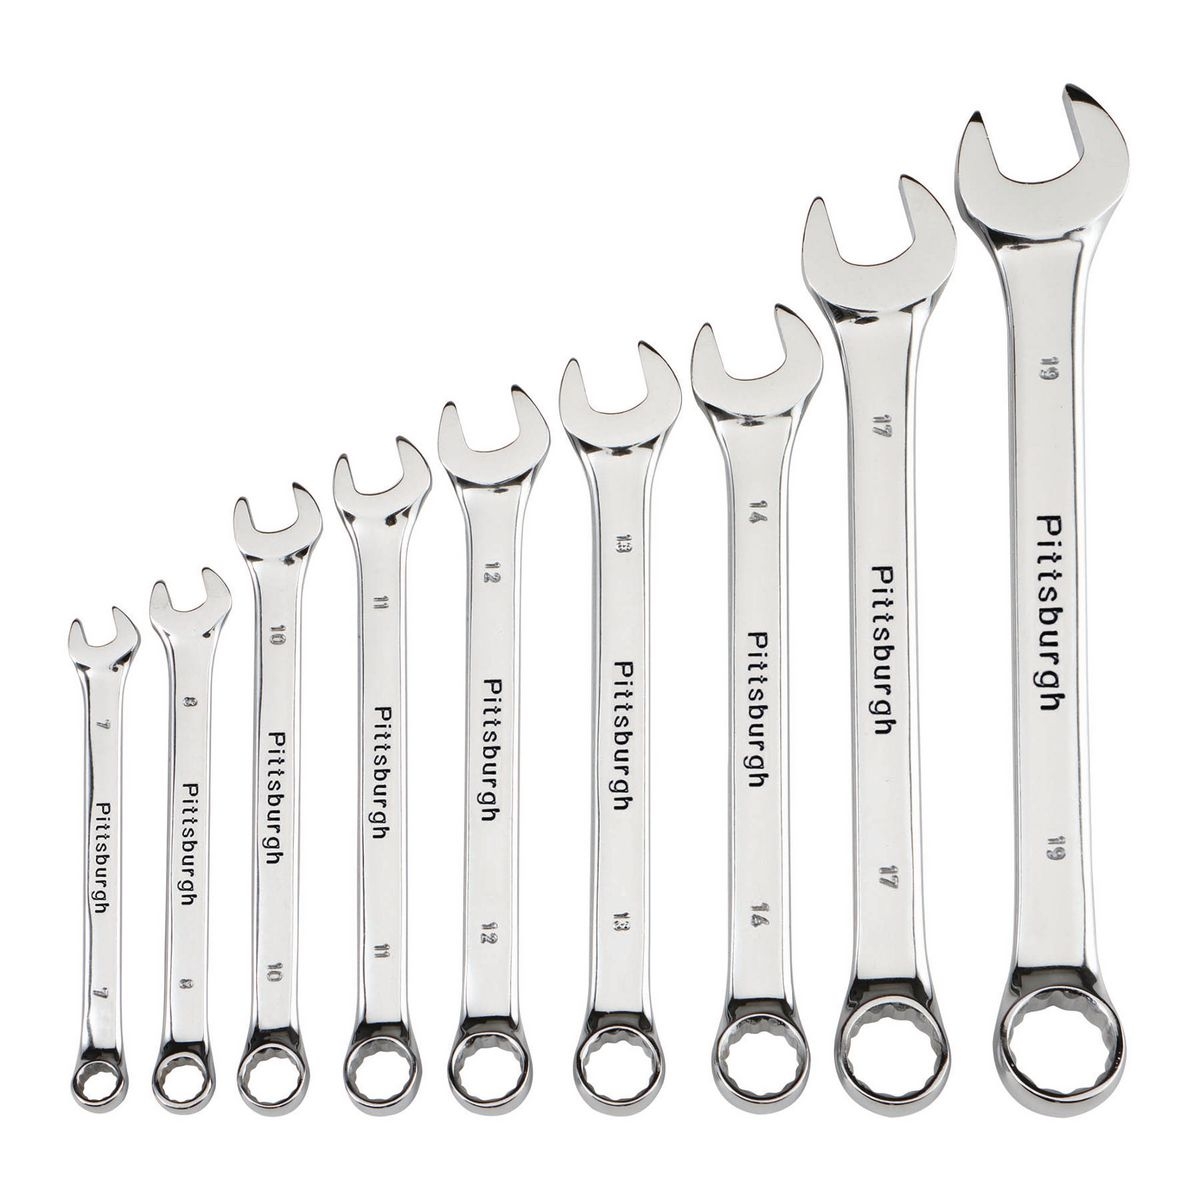 PITTSBURGH Fully Polished Metric Combination Wrench Set 9 Pc. - Item 42305 / 63171 / 69044